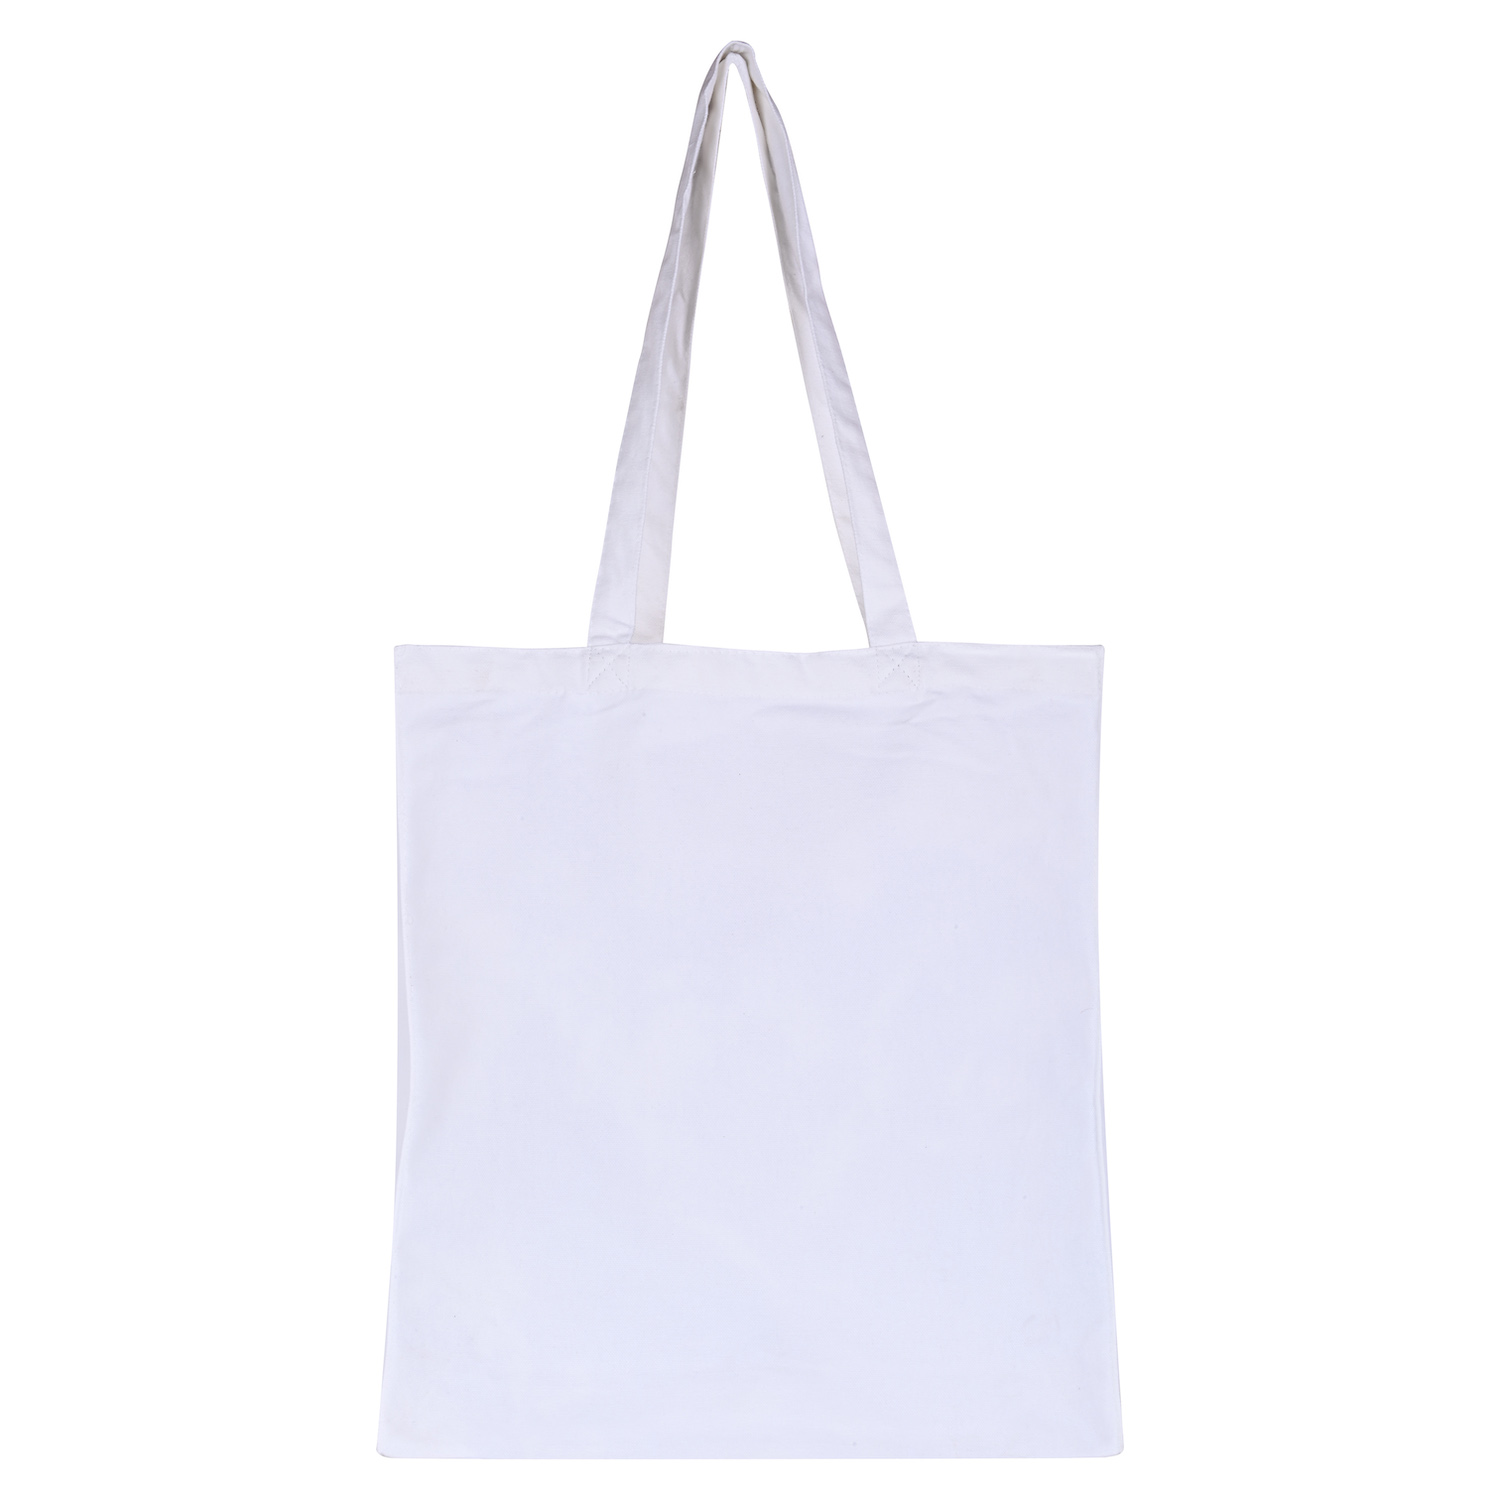 Large Grocery Shopping Tote Bag - No Plastic Shop